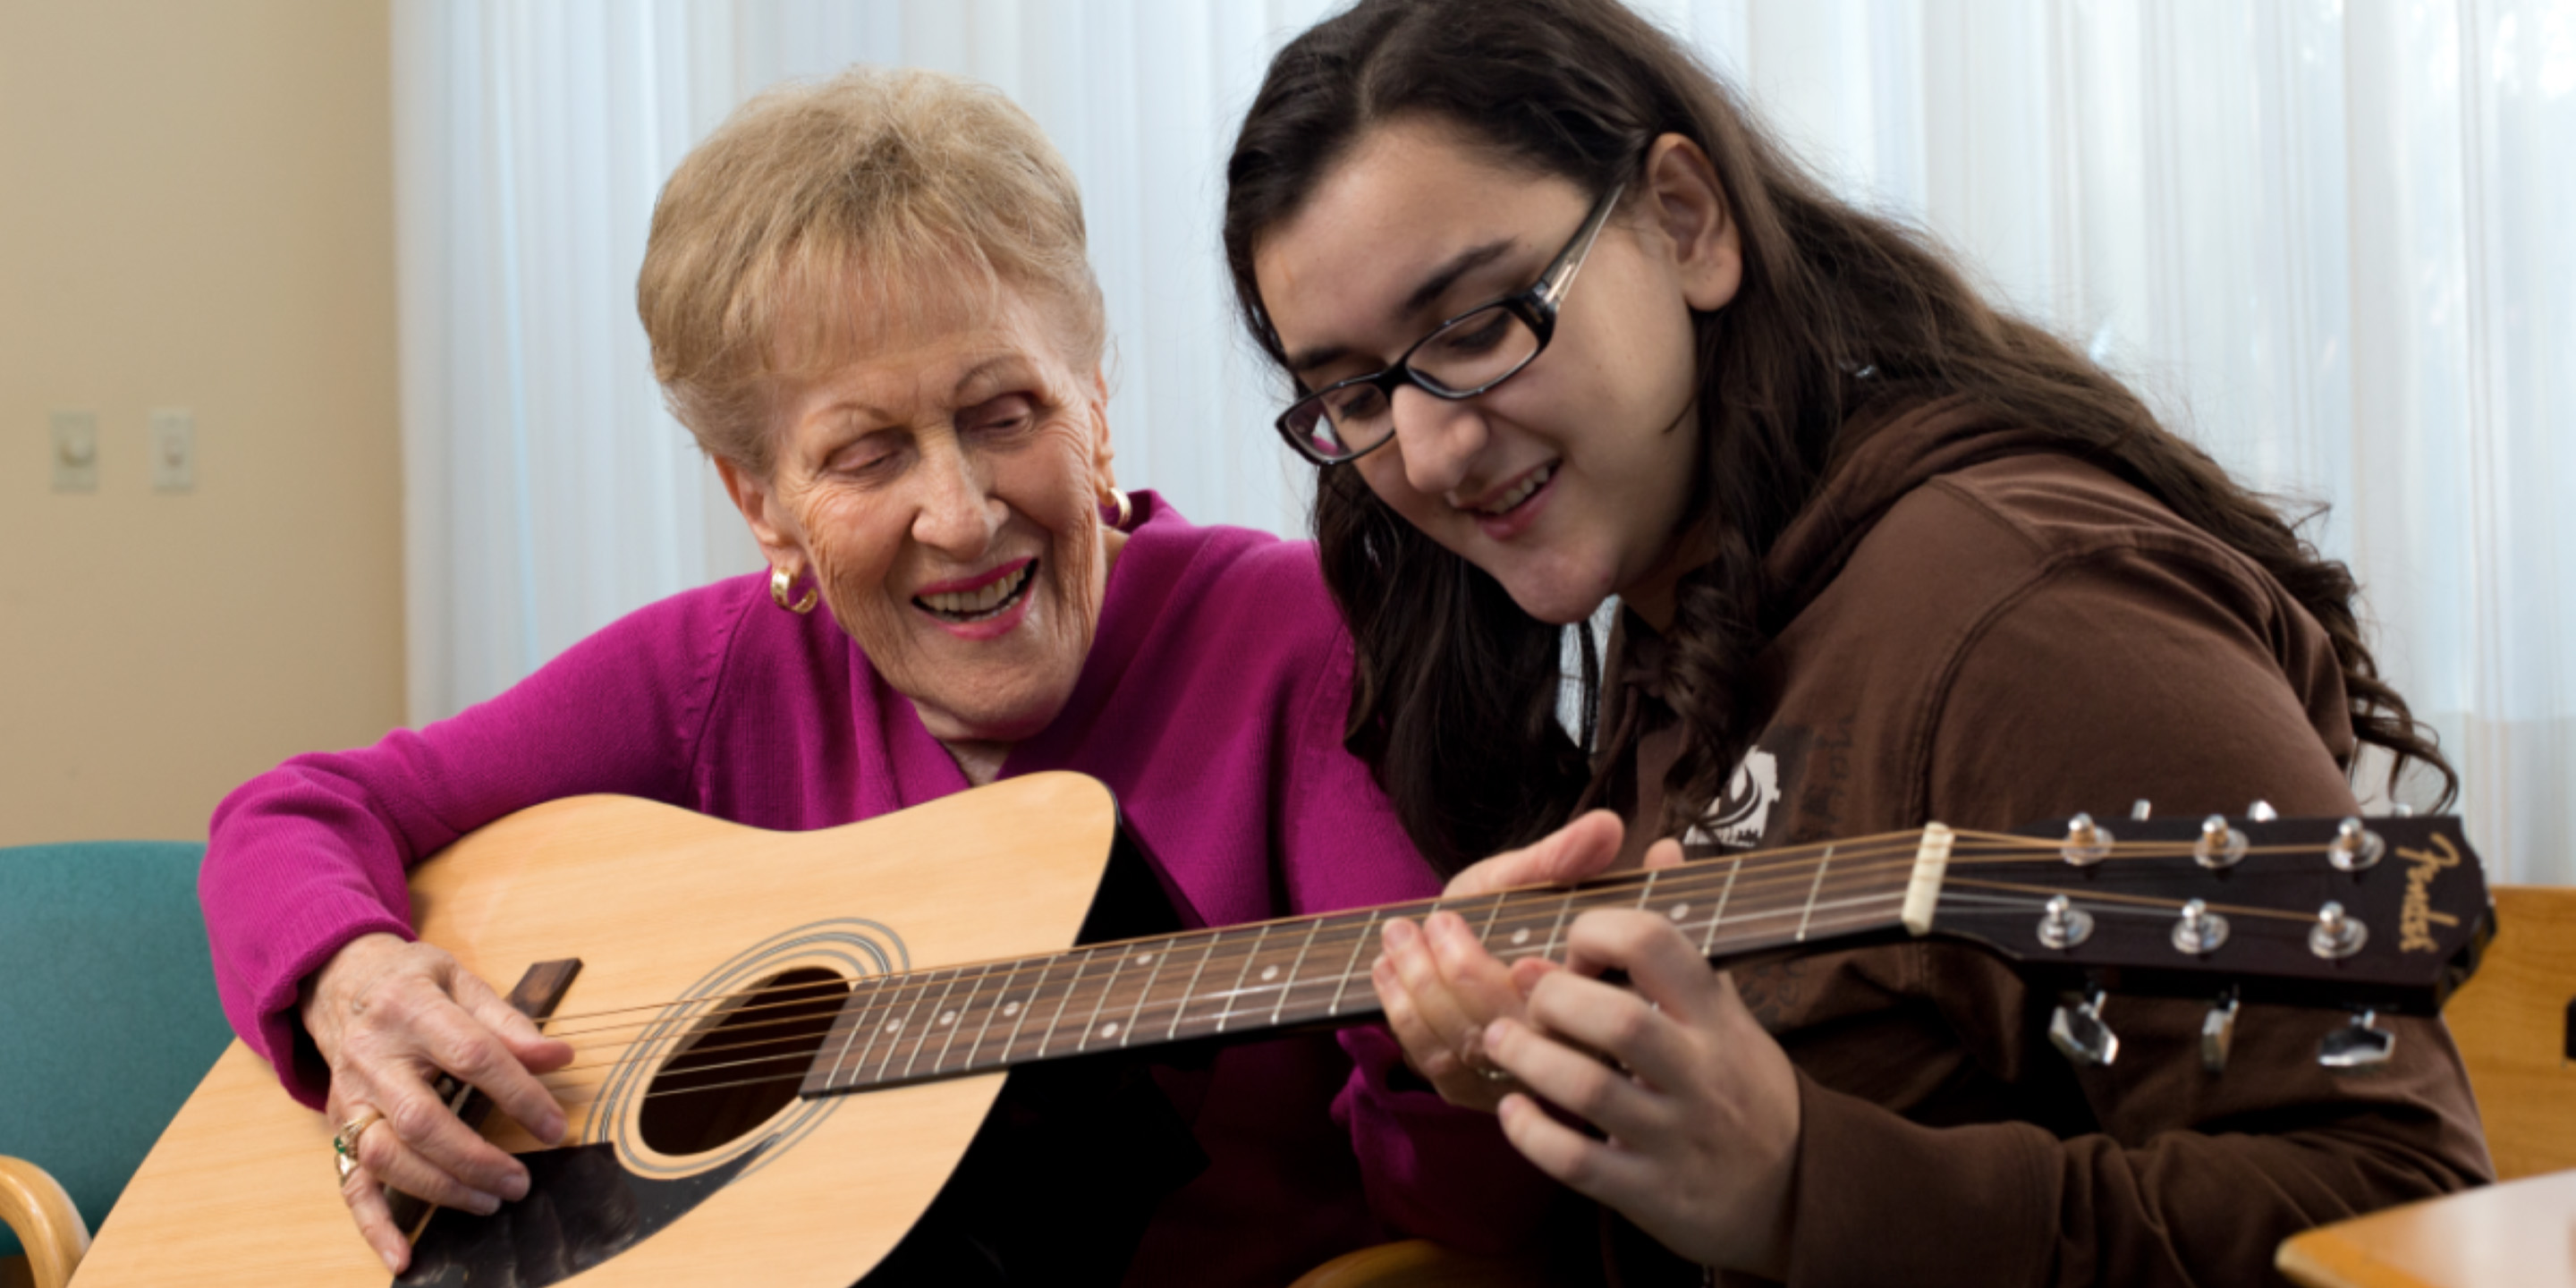 Young girl sitting with senior woman who is playing guitar